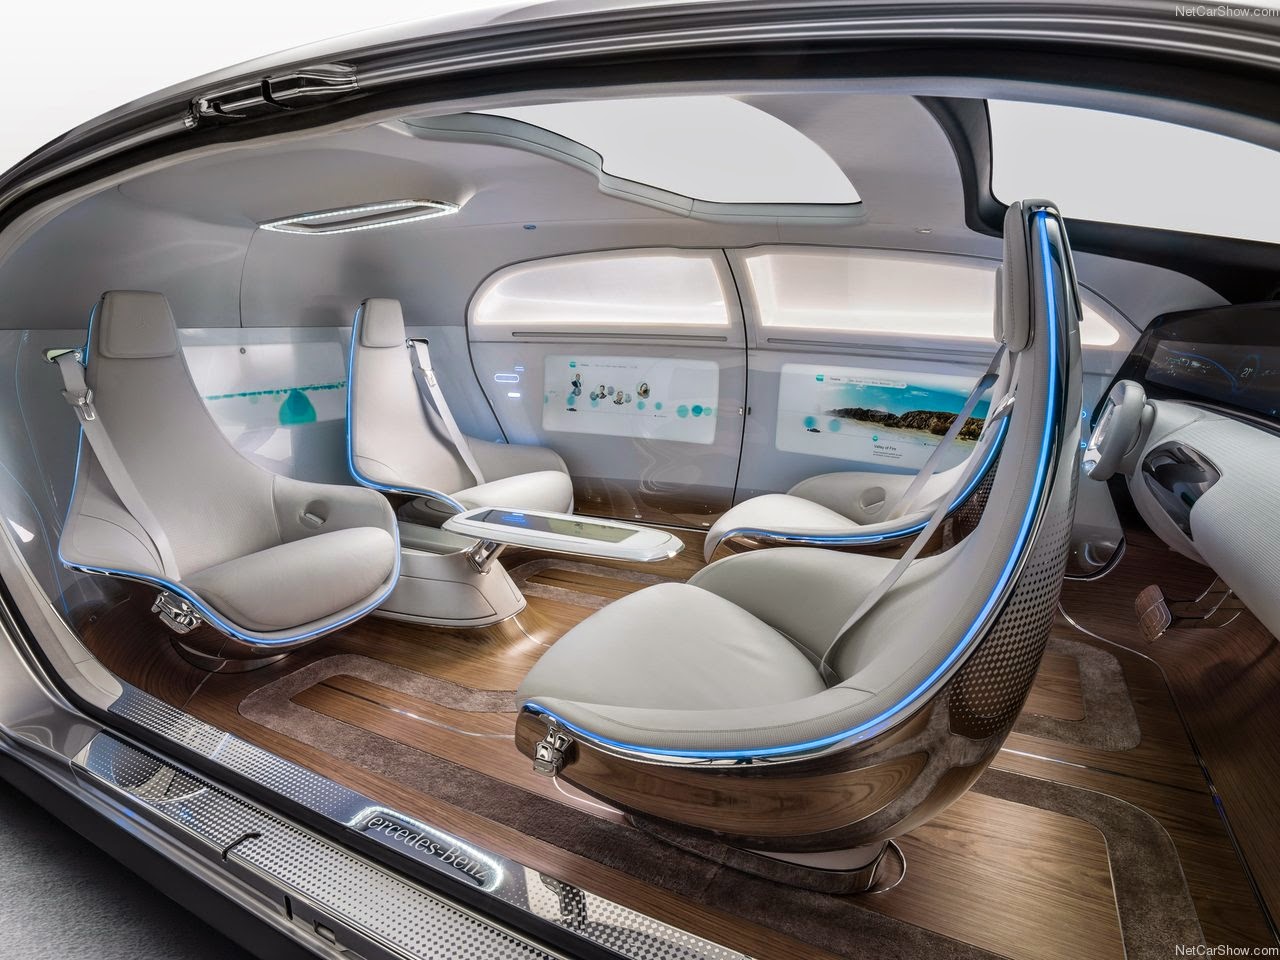 2015 Mercedes Benz F015 Luxury In Motion Concept